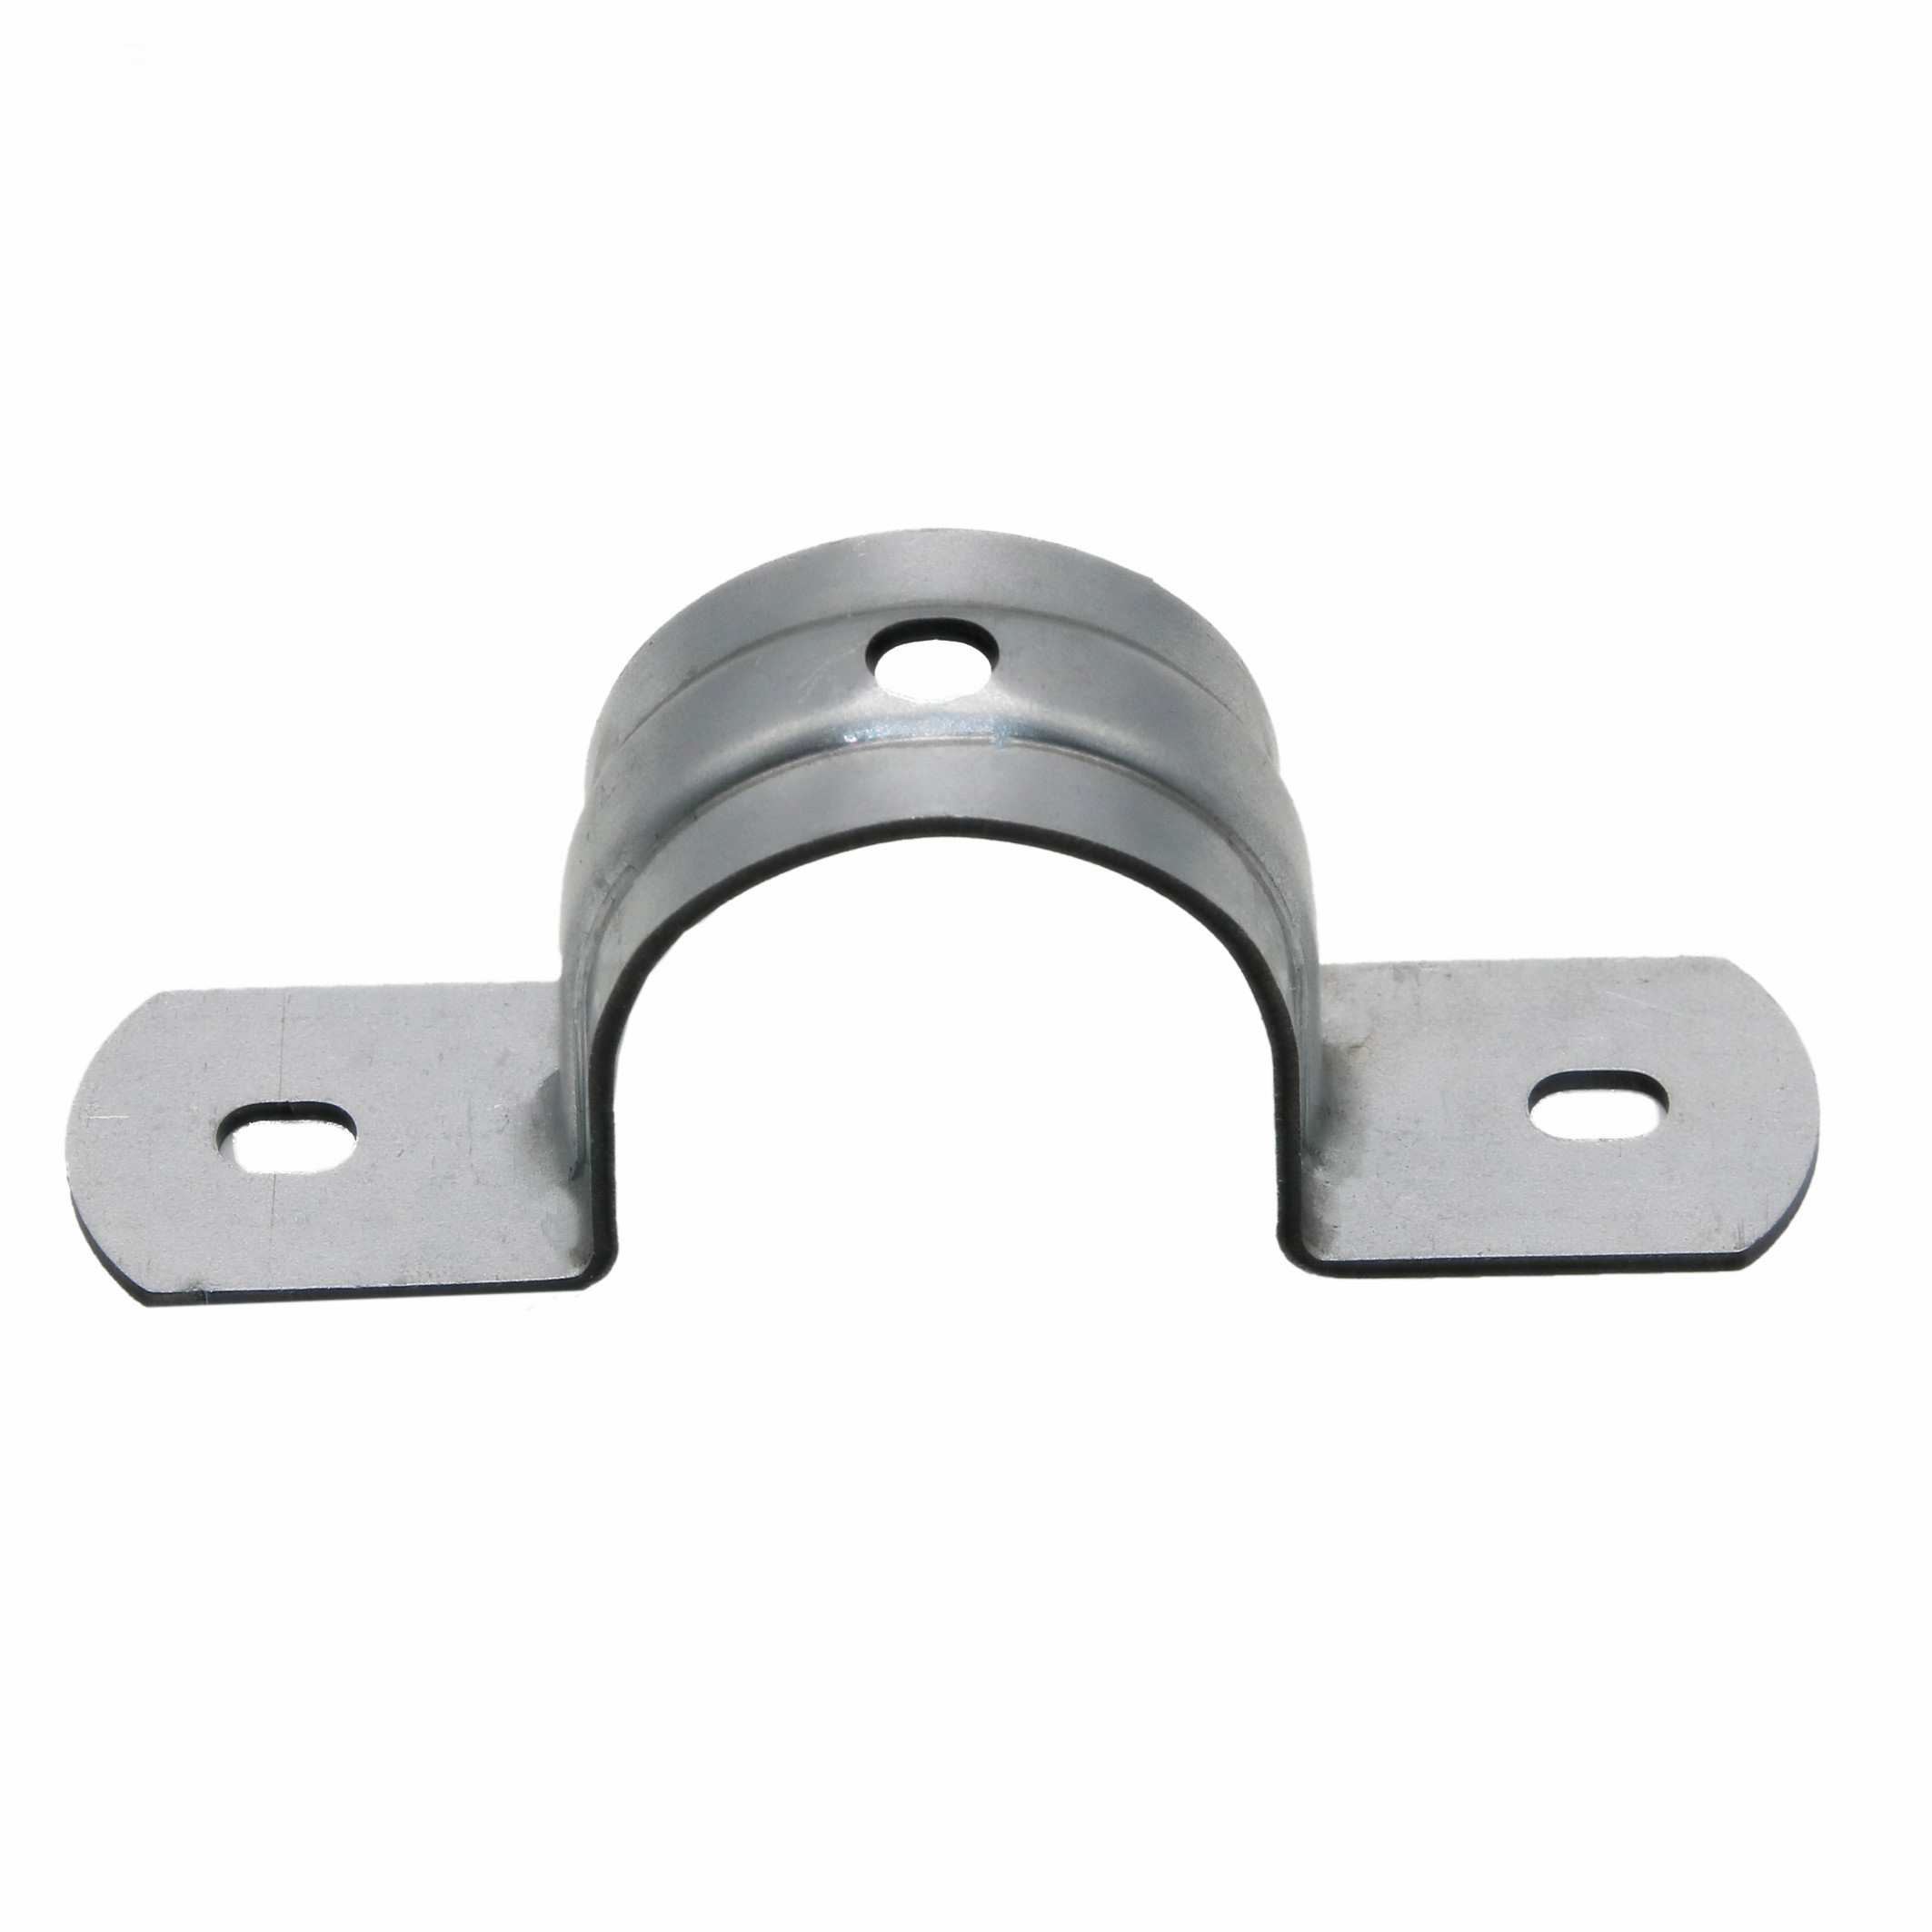 70mm Saddle Pipe Tube Clip Clamp BZP U Type Bright Zinc Plated 